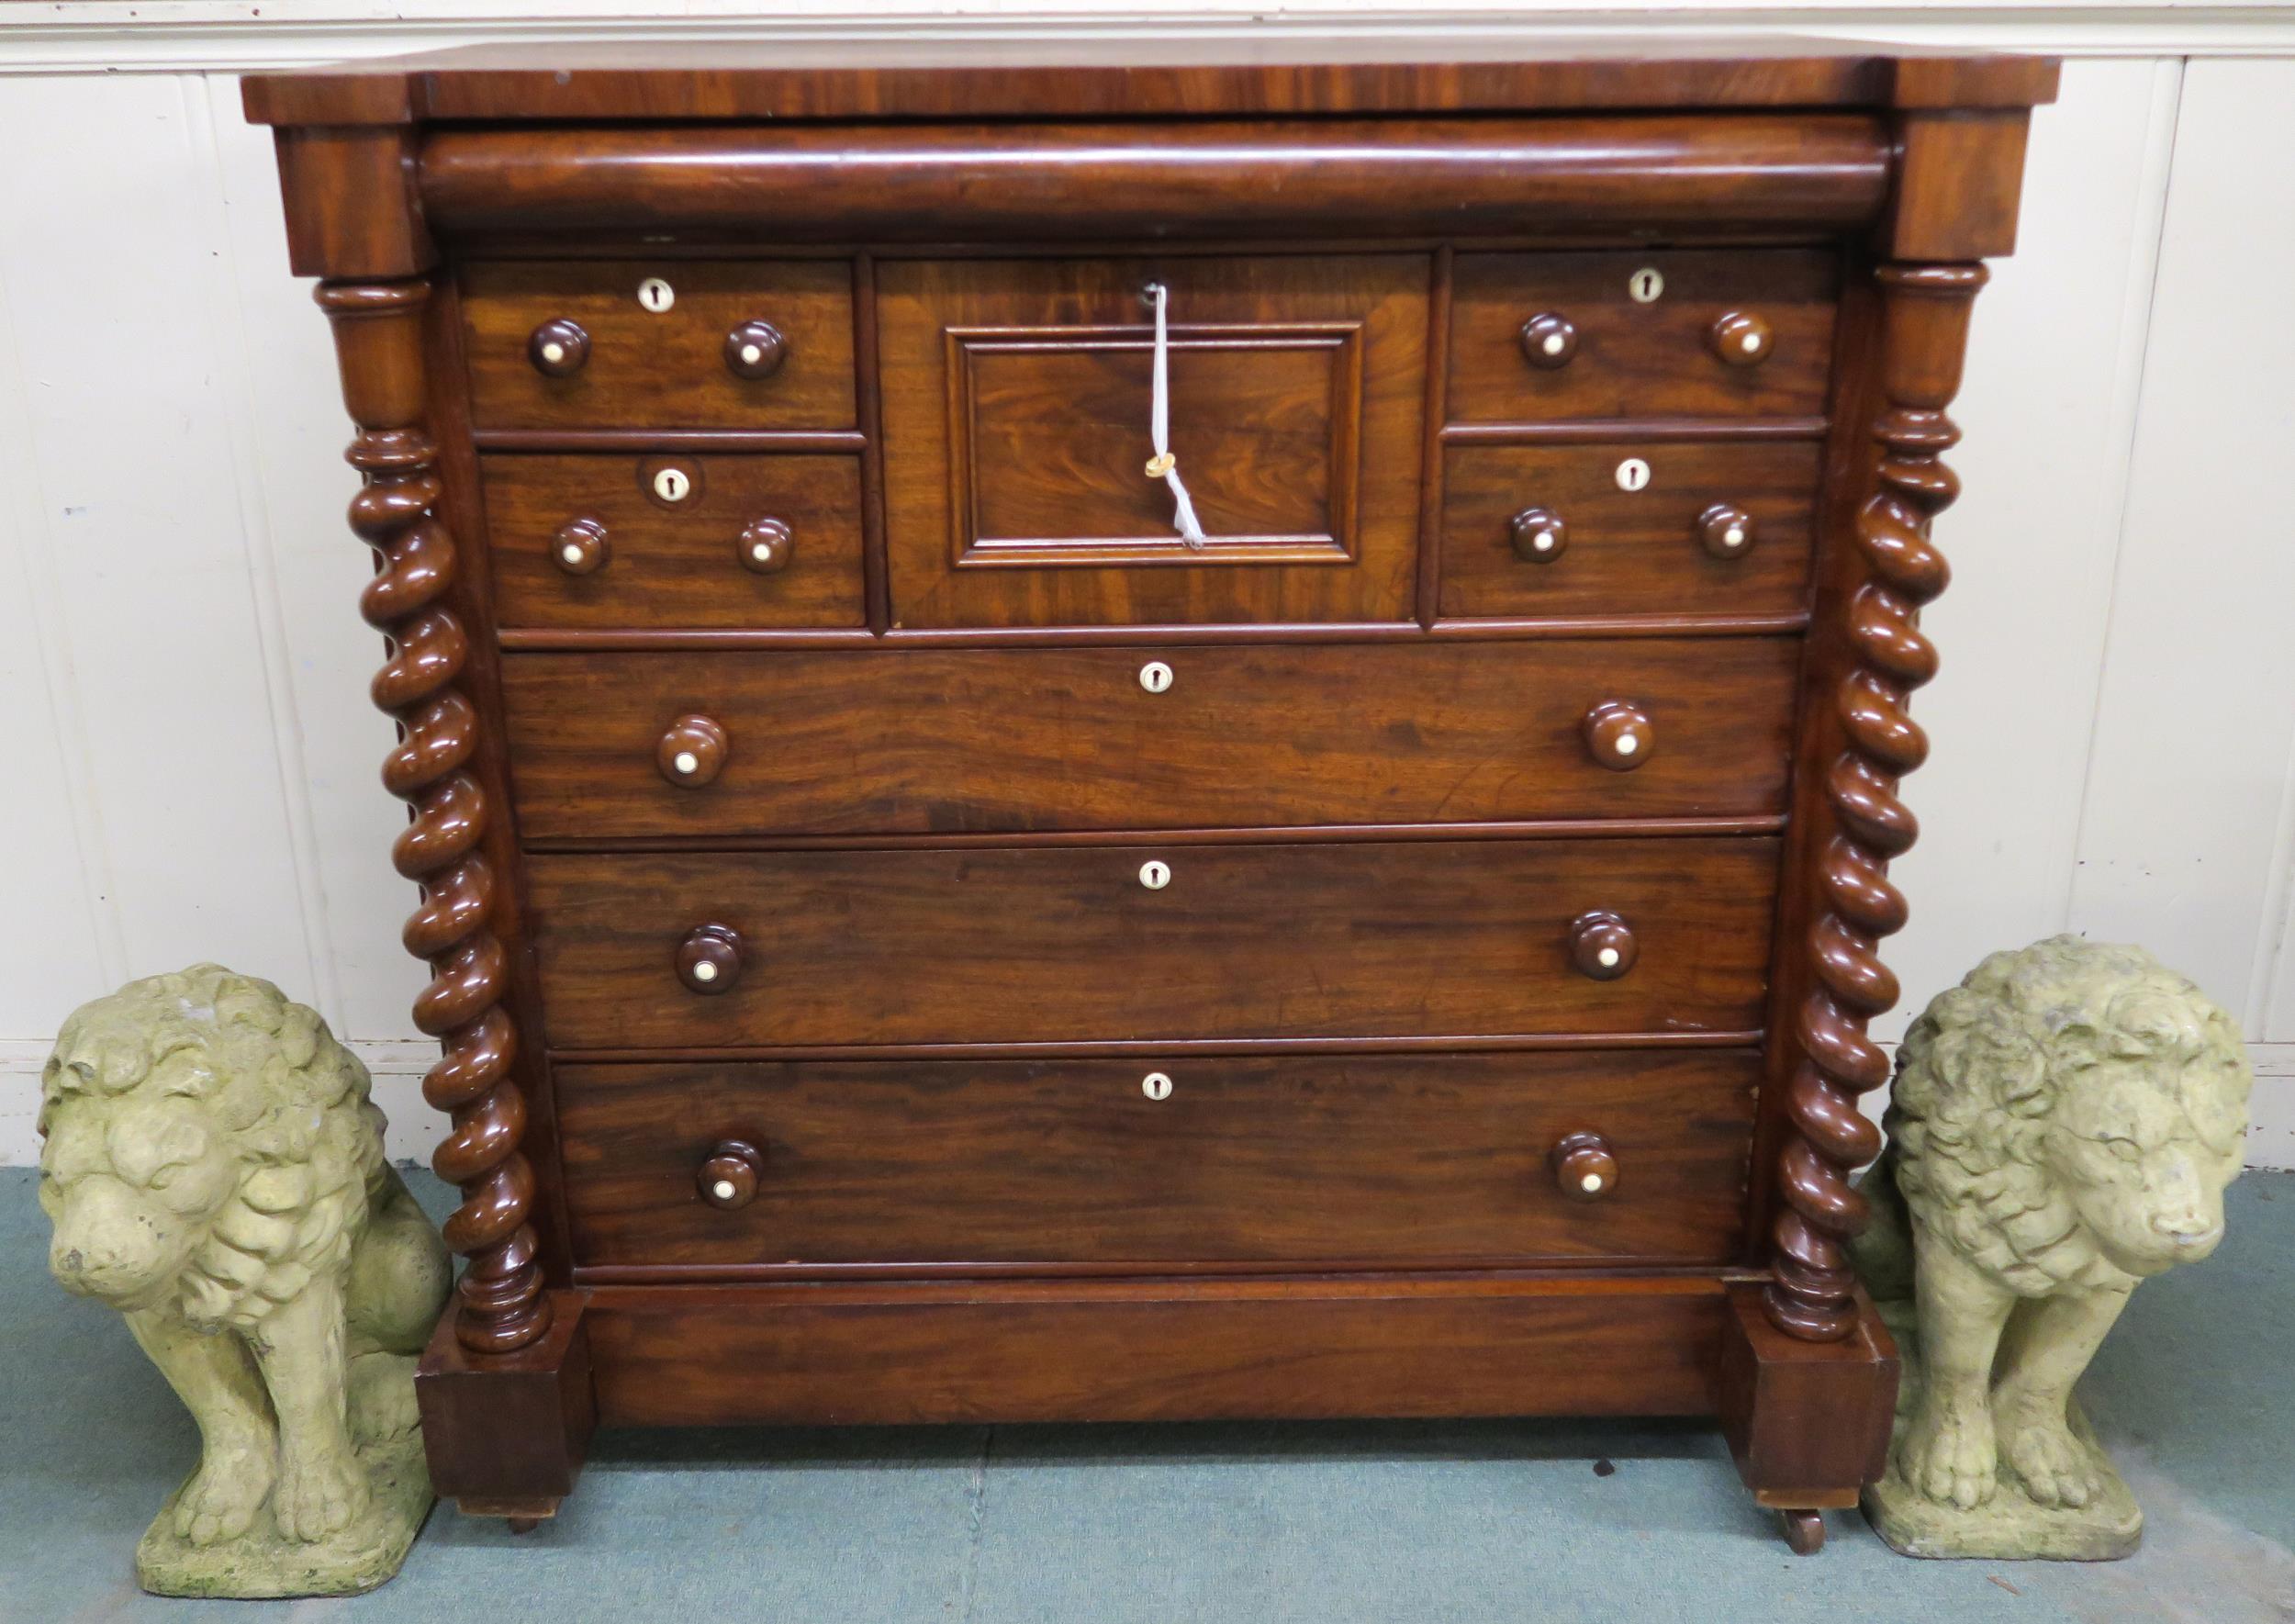 A Victorian mahogany "Scotch" chest of drawers with four above three drawers flanked by barley twist